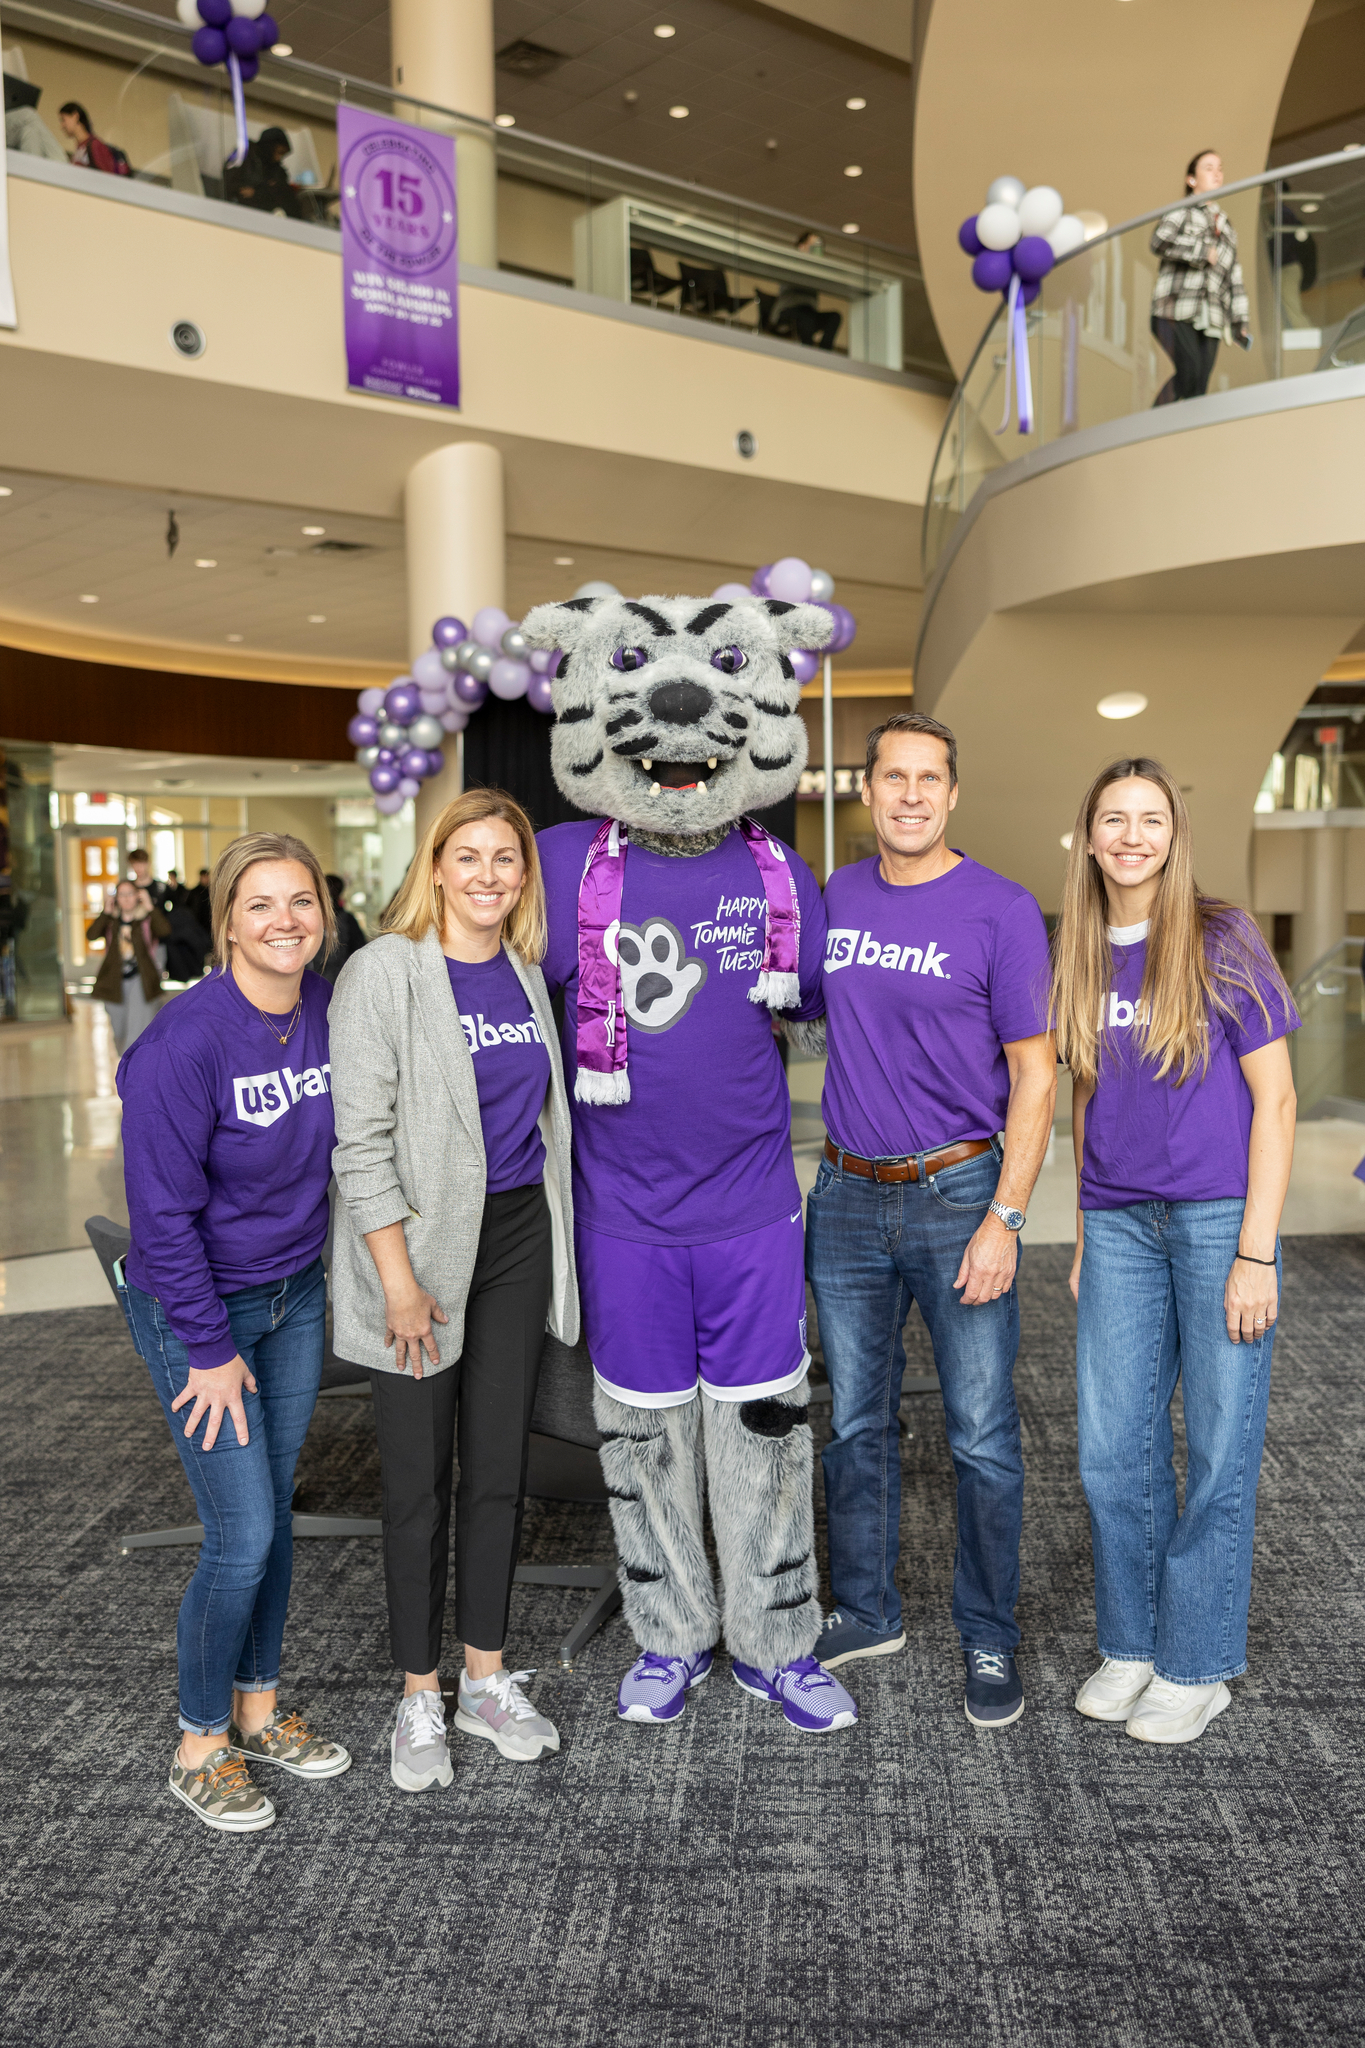 U.S. Bank representatives and Tommie taking a group photo in the Anderson Student Center